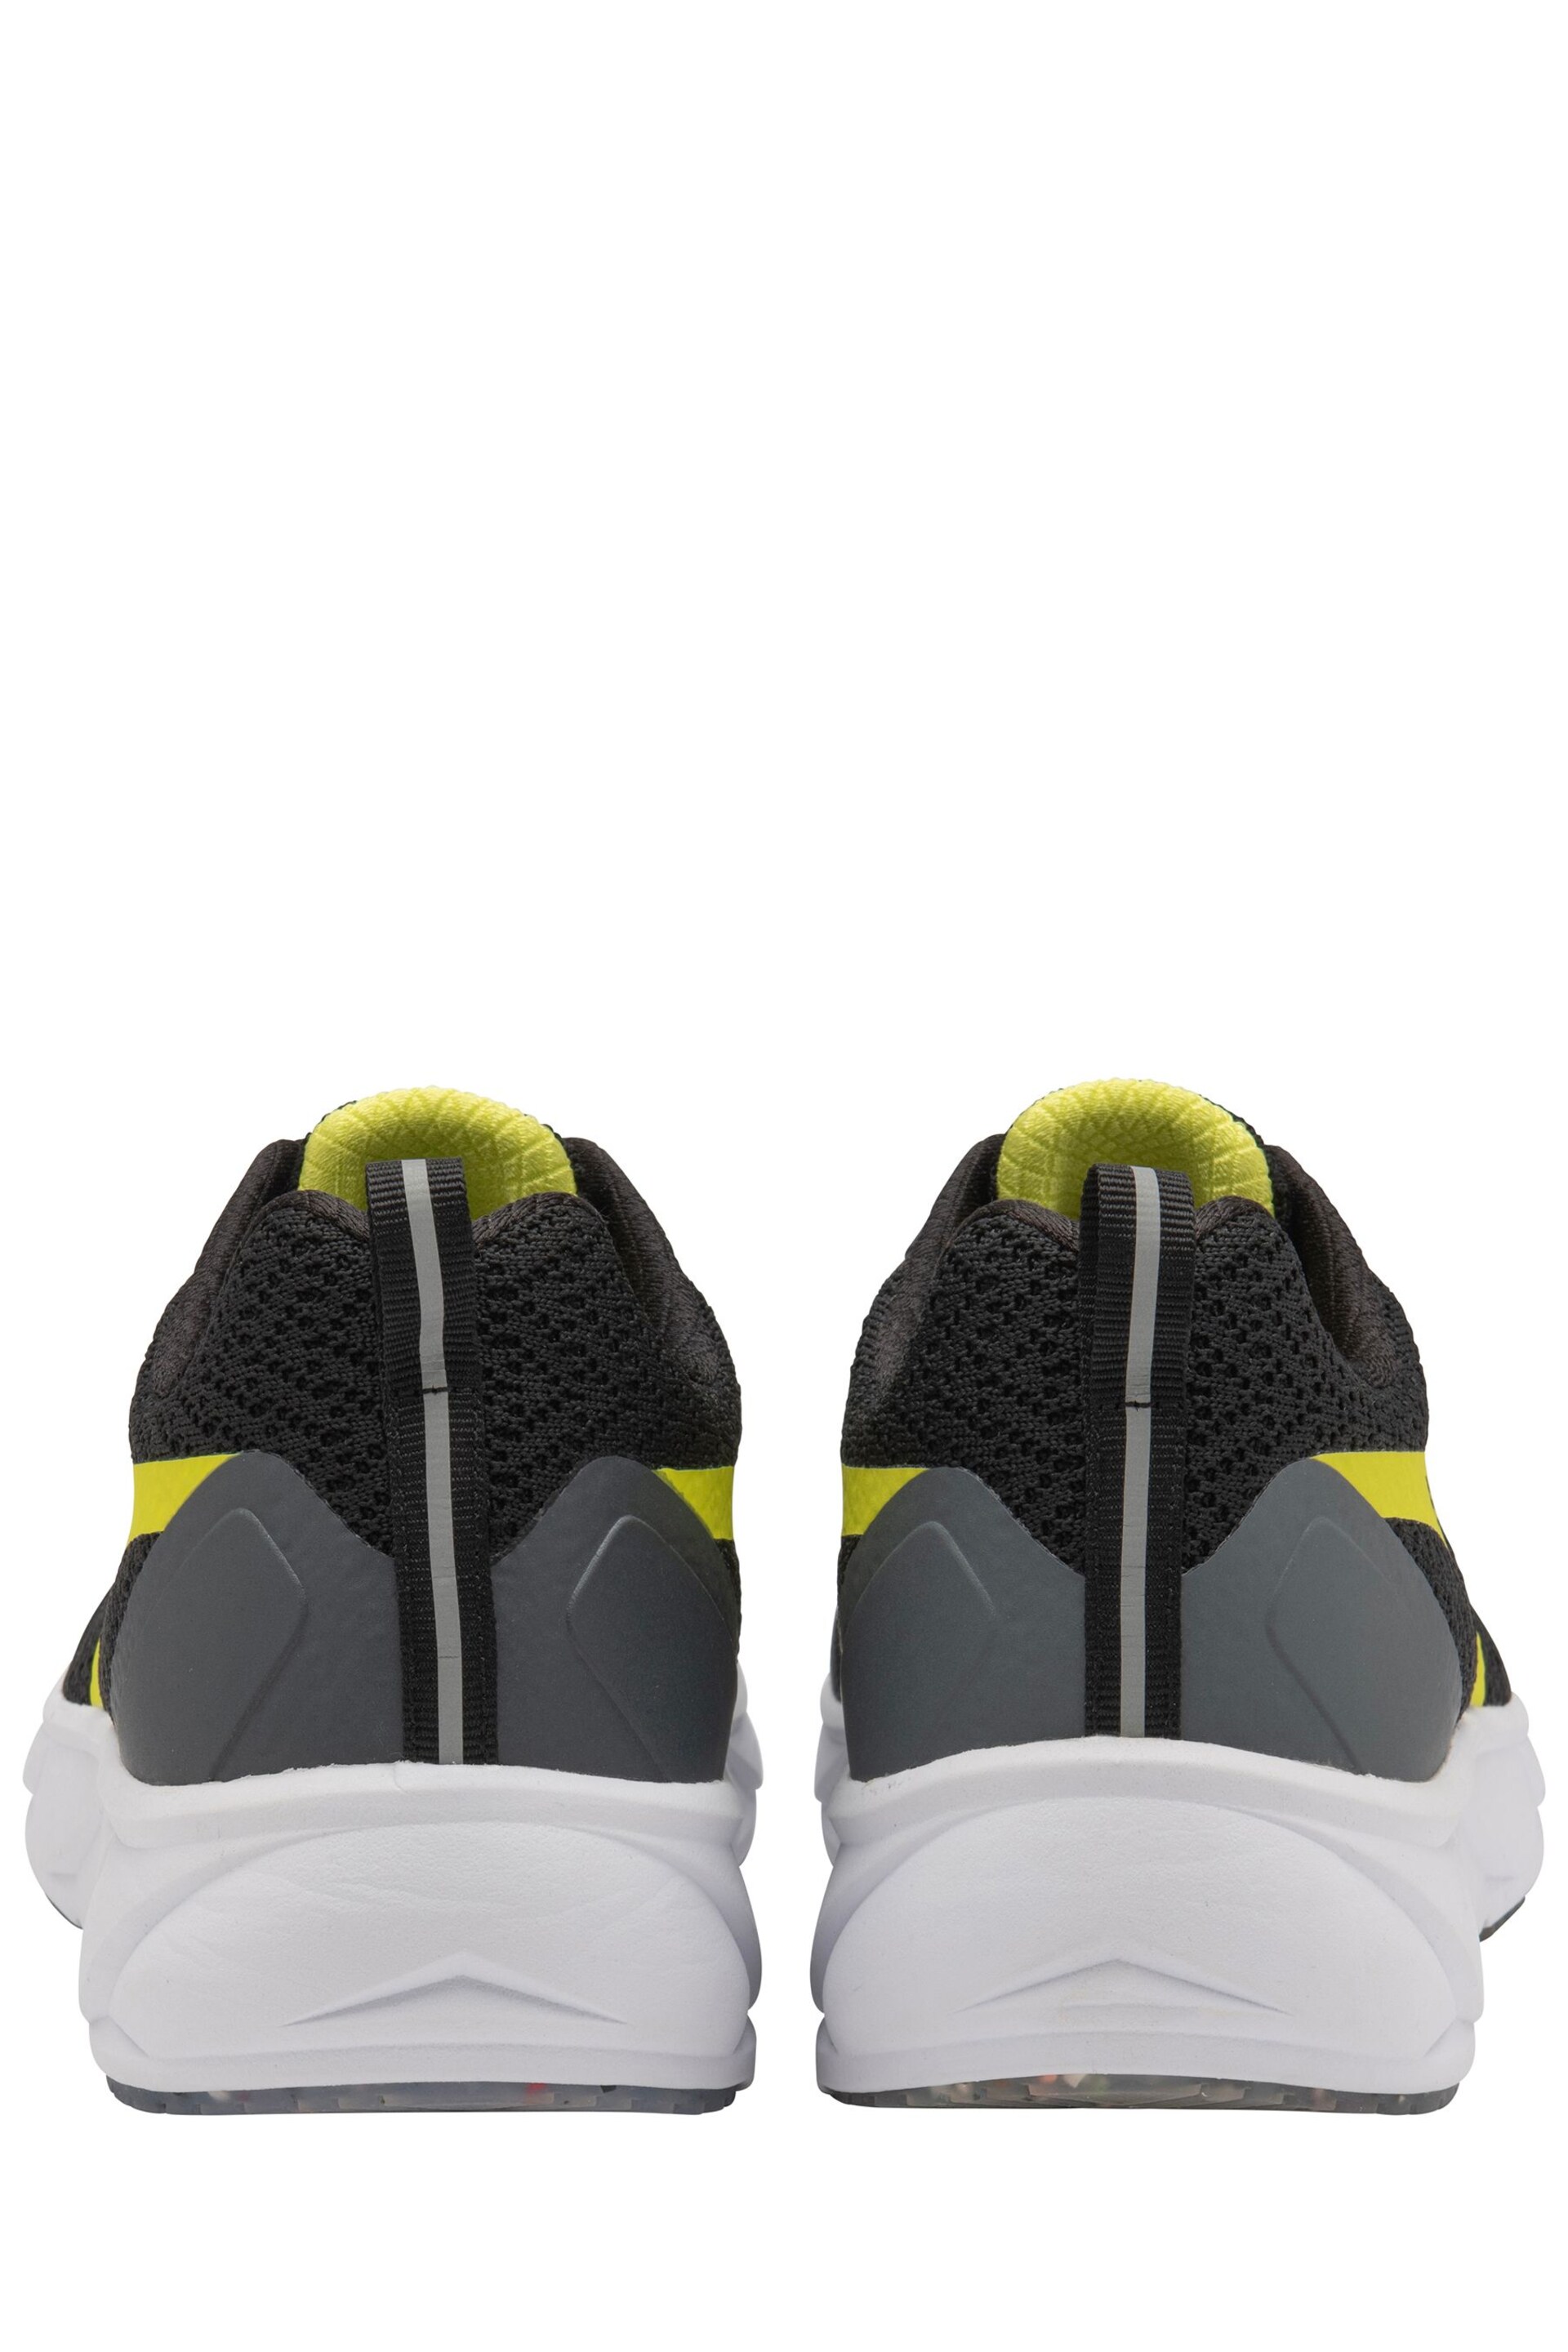 Gola Black Men's Typhoon RMD Mesh Lace-Up Running Trainers - Image 3 of 4